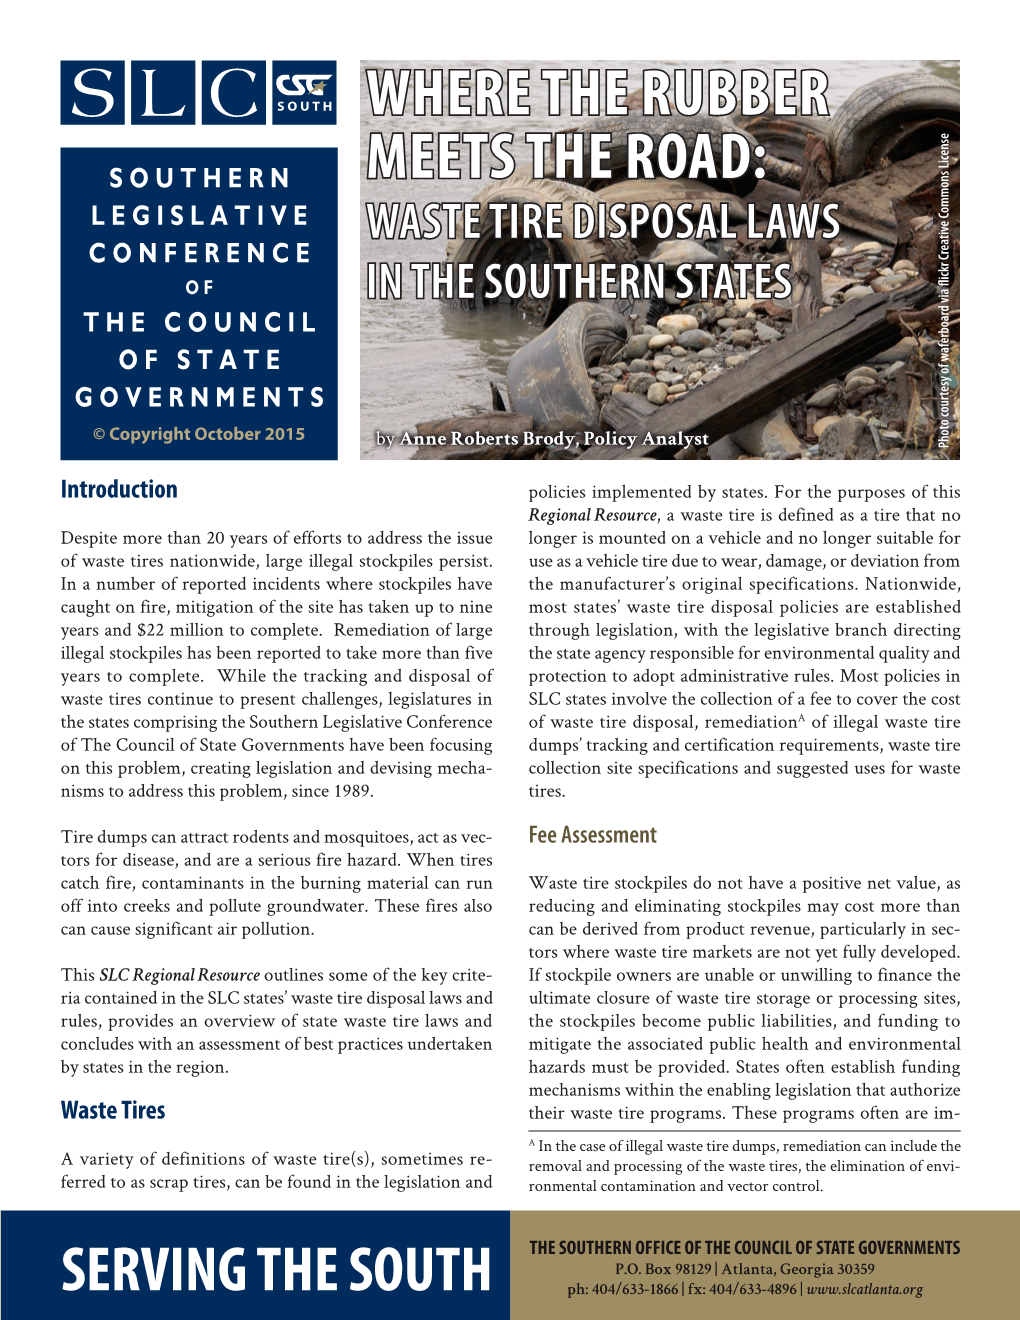 Where Rubber Meets the Road: Waste Tire Disposal Laws in the Southern